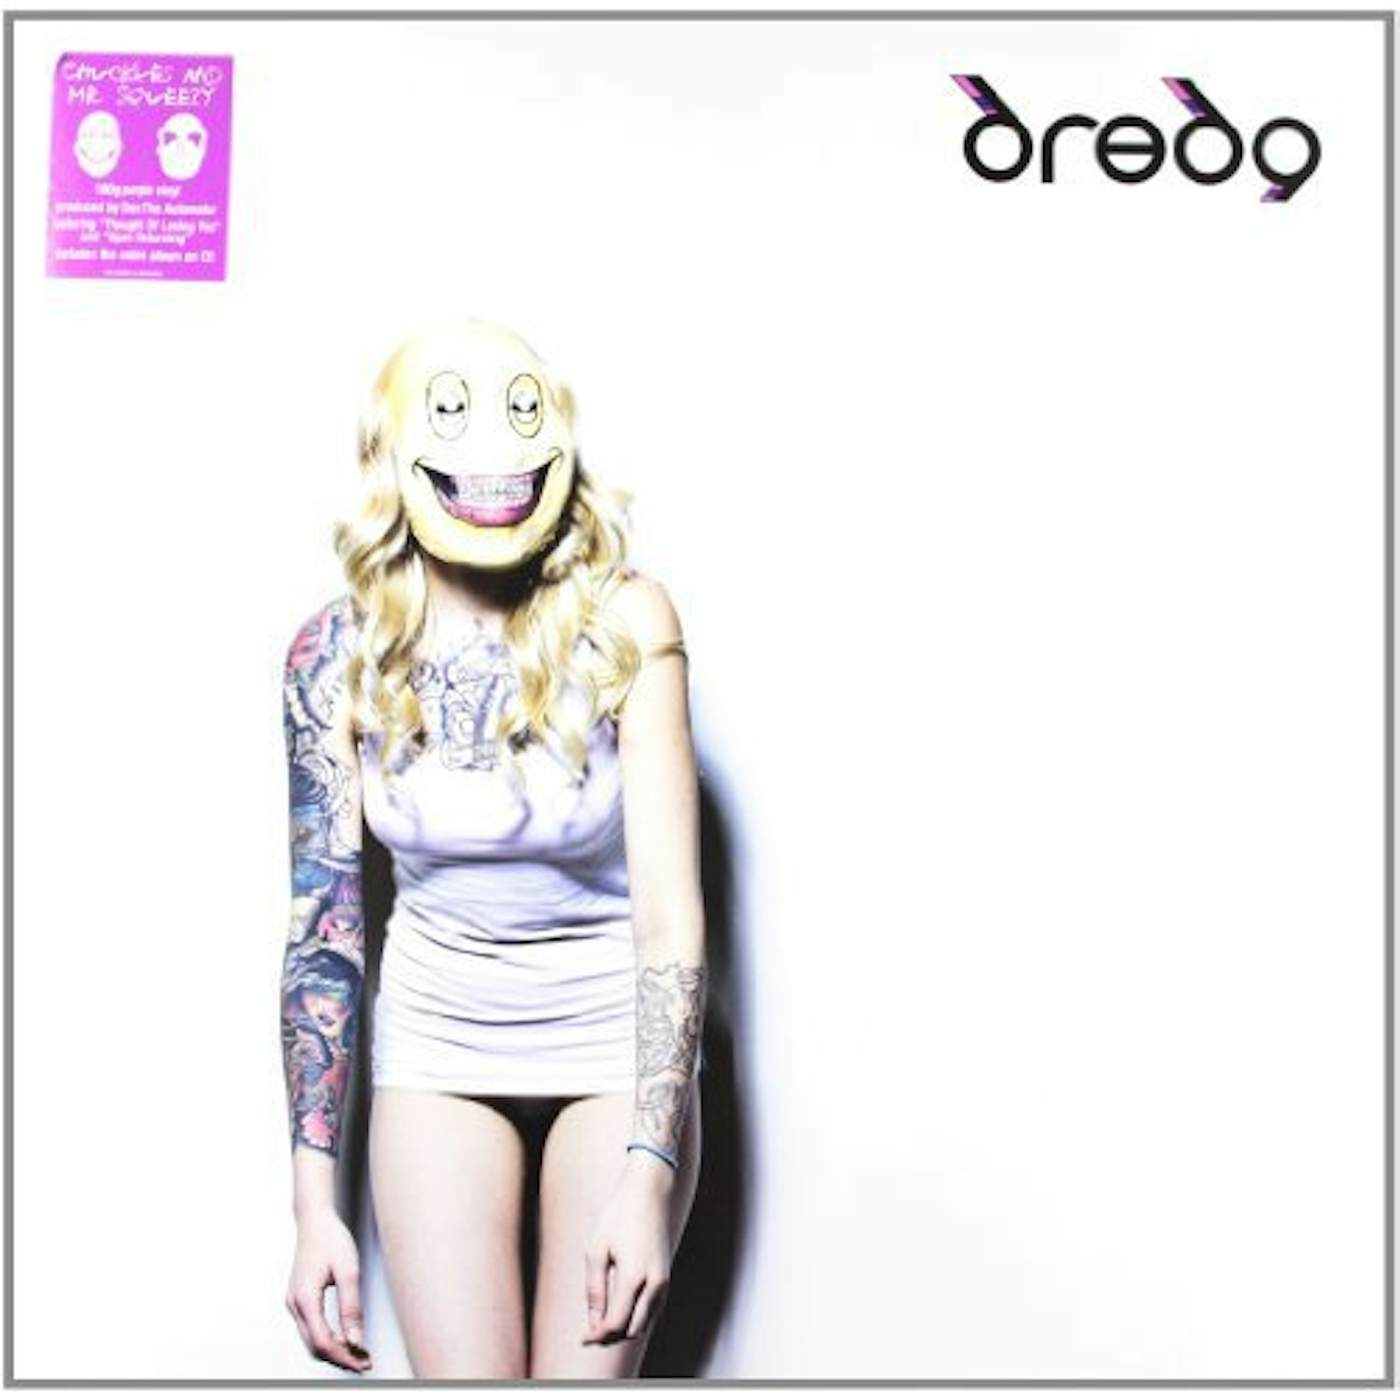 Dredg Chuckles and Mr. Squeezy Vinyl Record